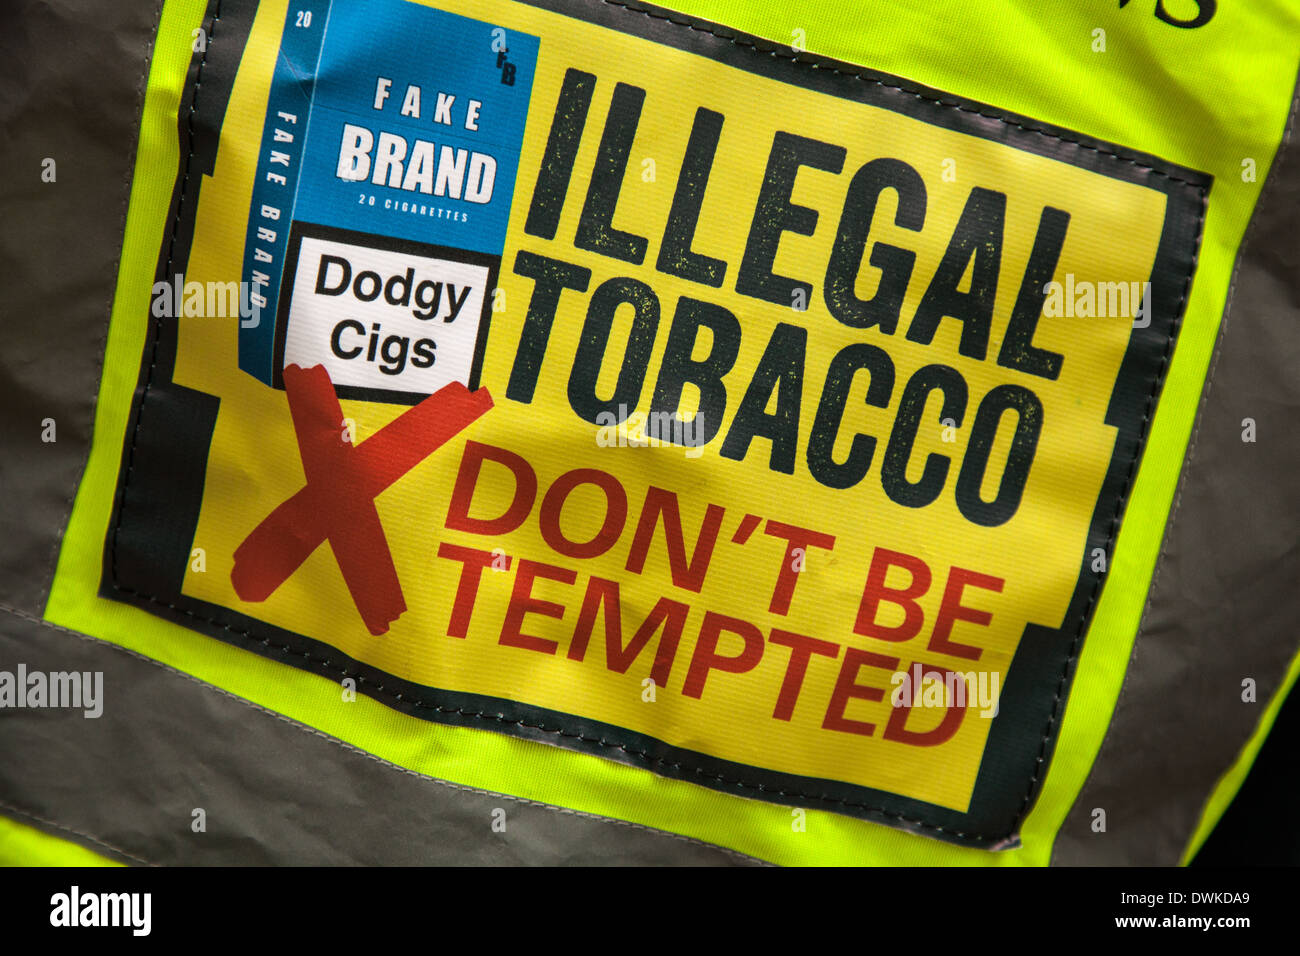 Fake brand Illegal Tobacco - Don't be tempted   Hi-vis shirt to deter the purchase of illegal imports of Dodgy cigs, Manchester City Centre, UK Stock Photo